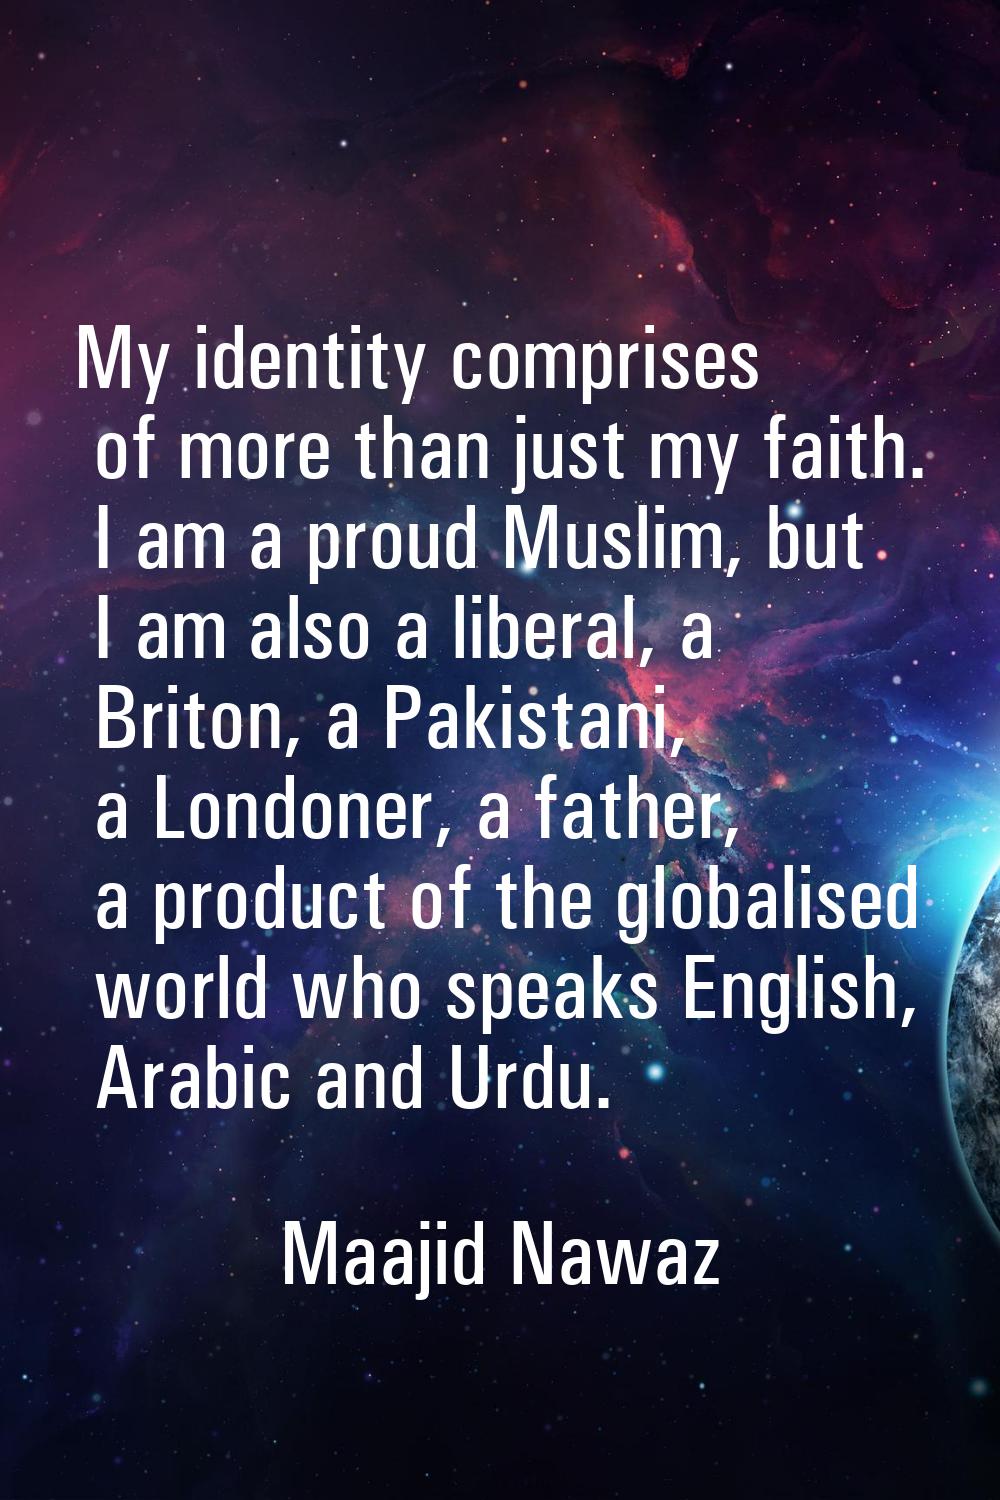 My identity comprises of more than just my faith. I am a proud Muslim, but I am also a liberal, a B